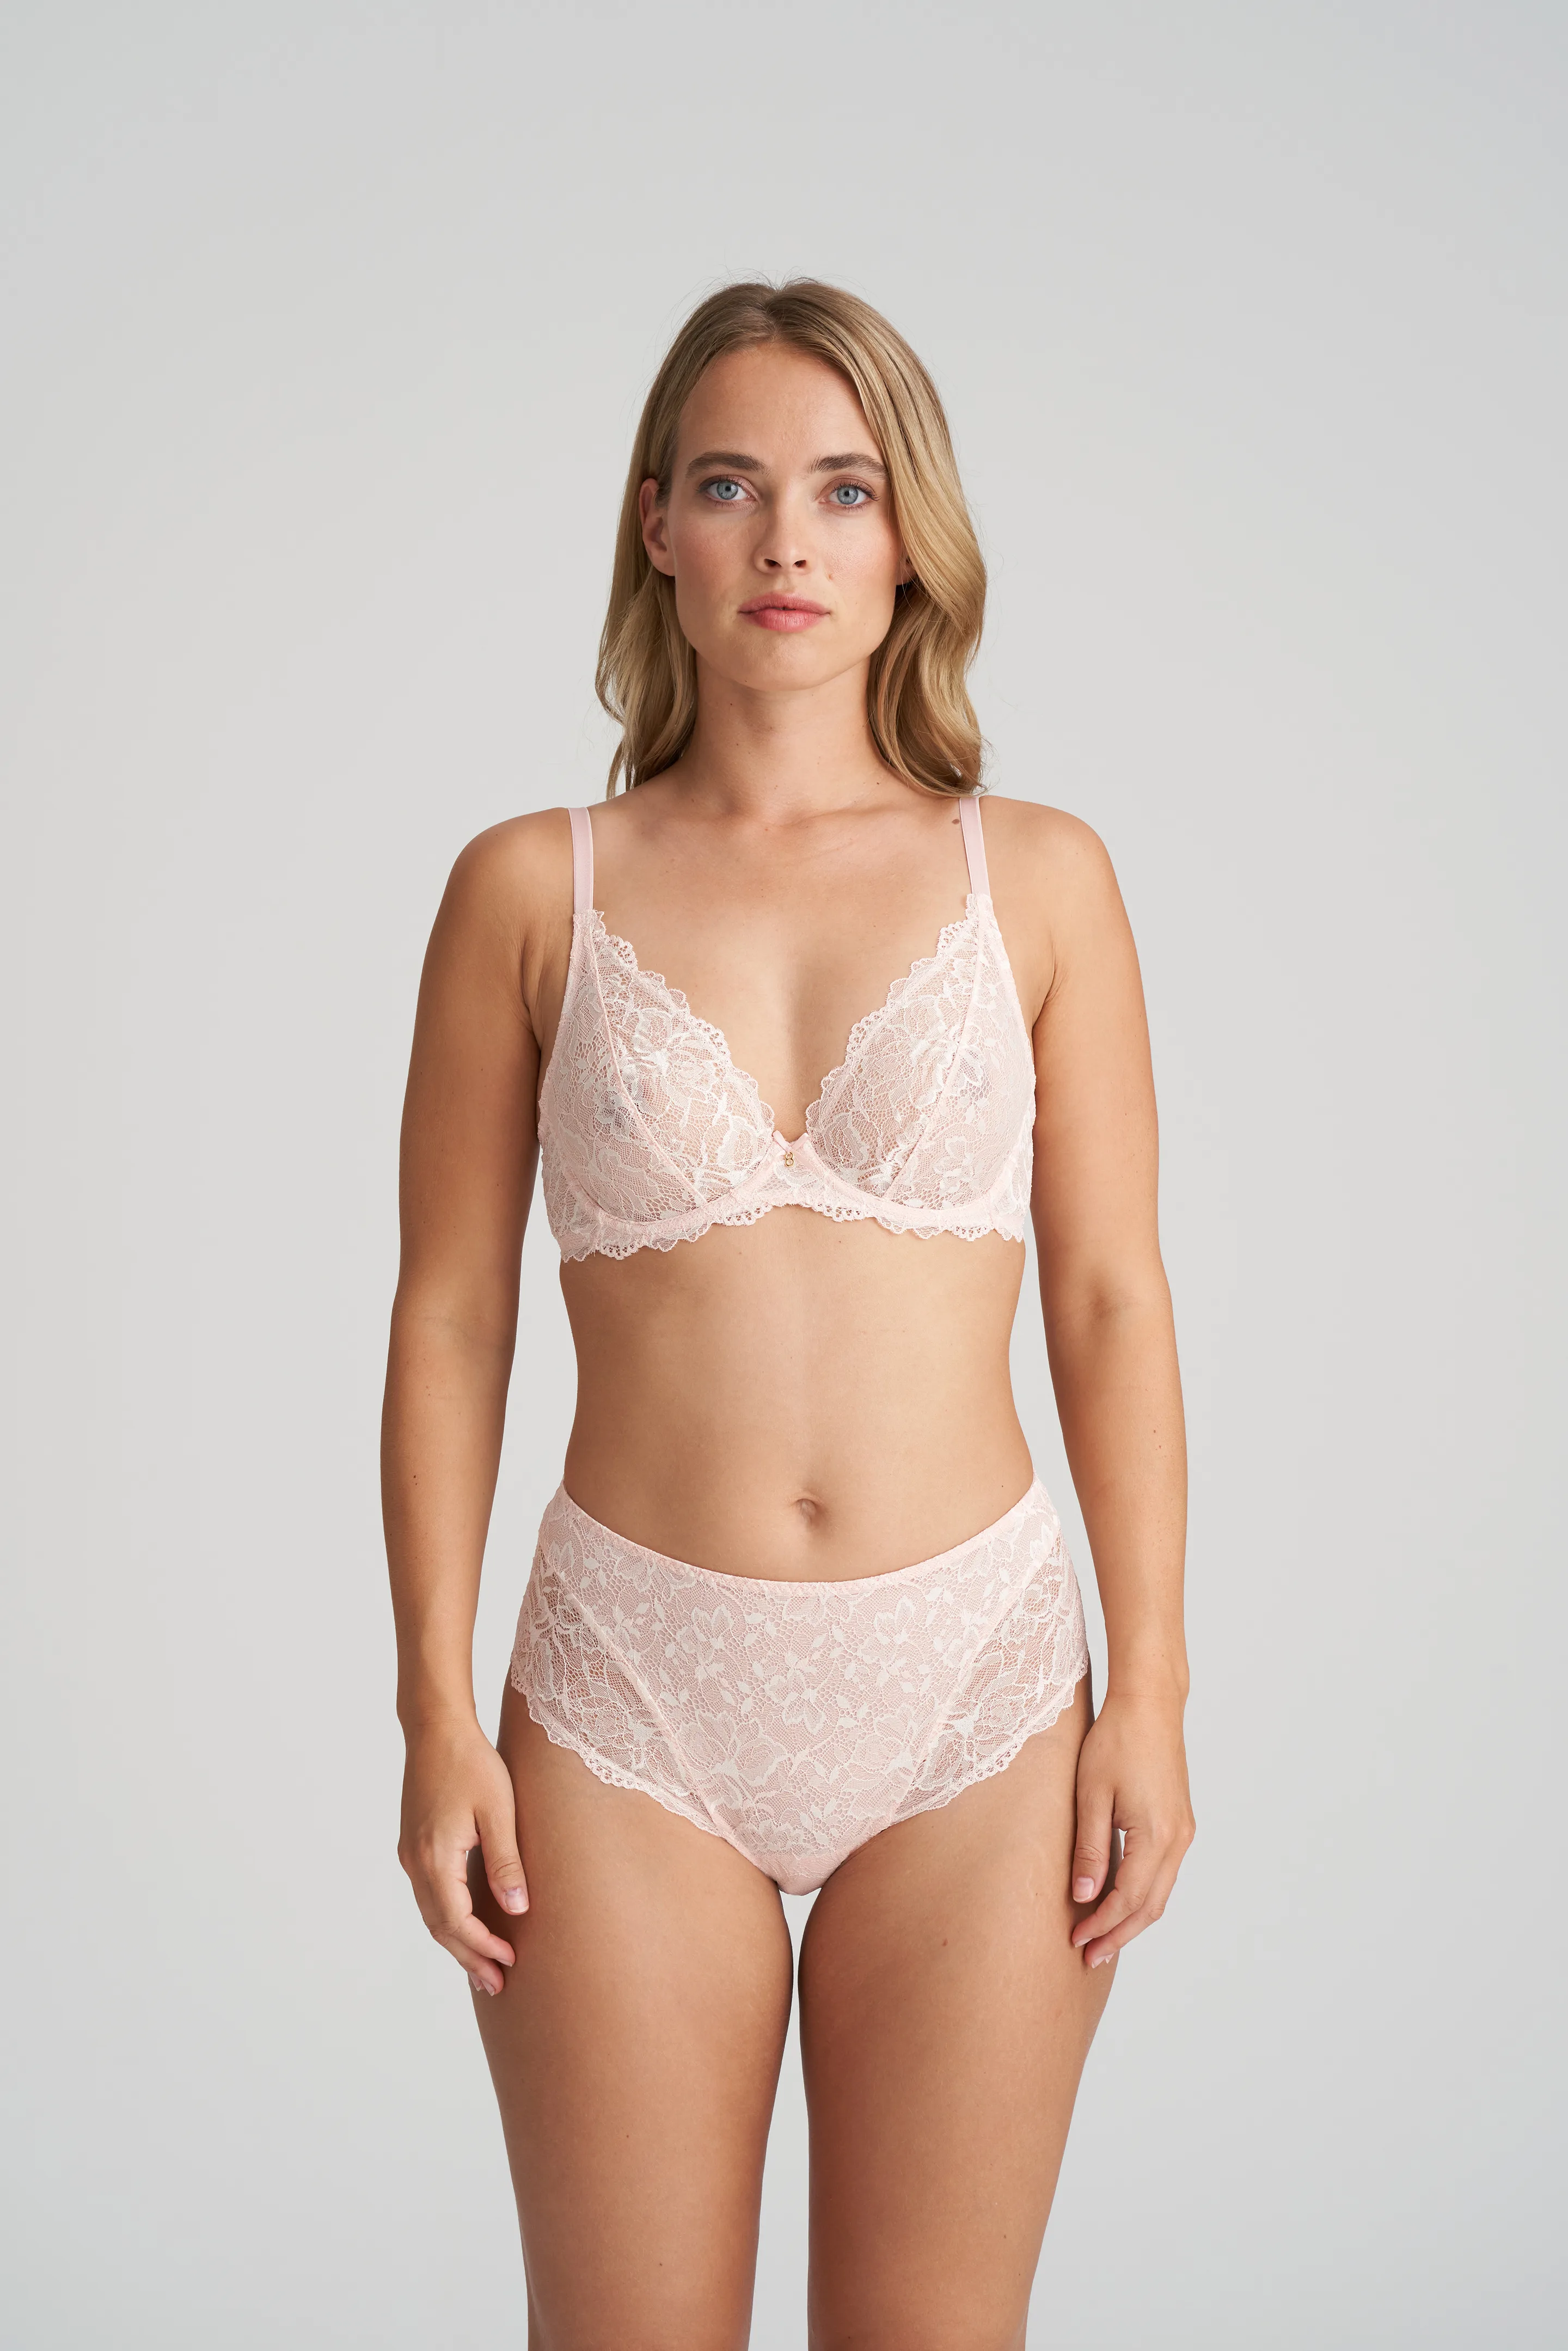 Marie Jo Jane Body in Natural B To D Cup